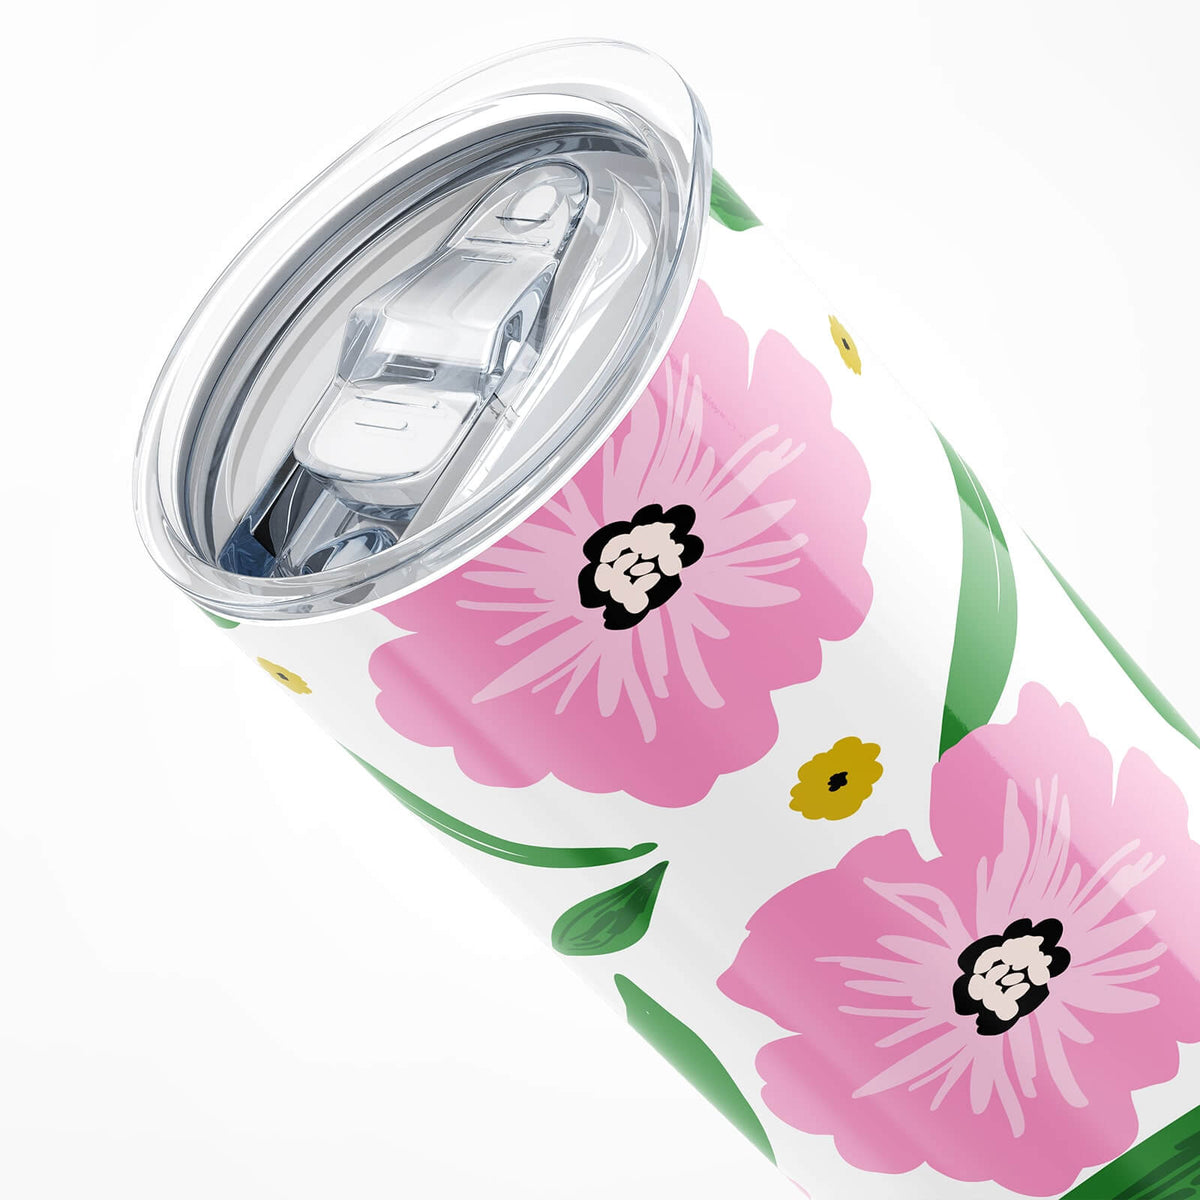 Pink Floral Insulated 20oz Tumbler